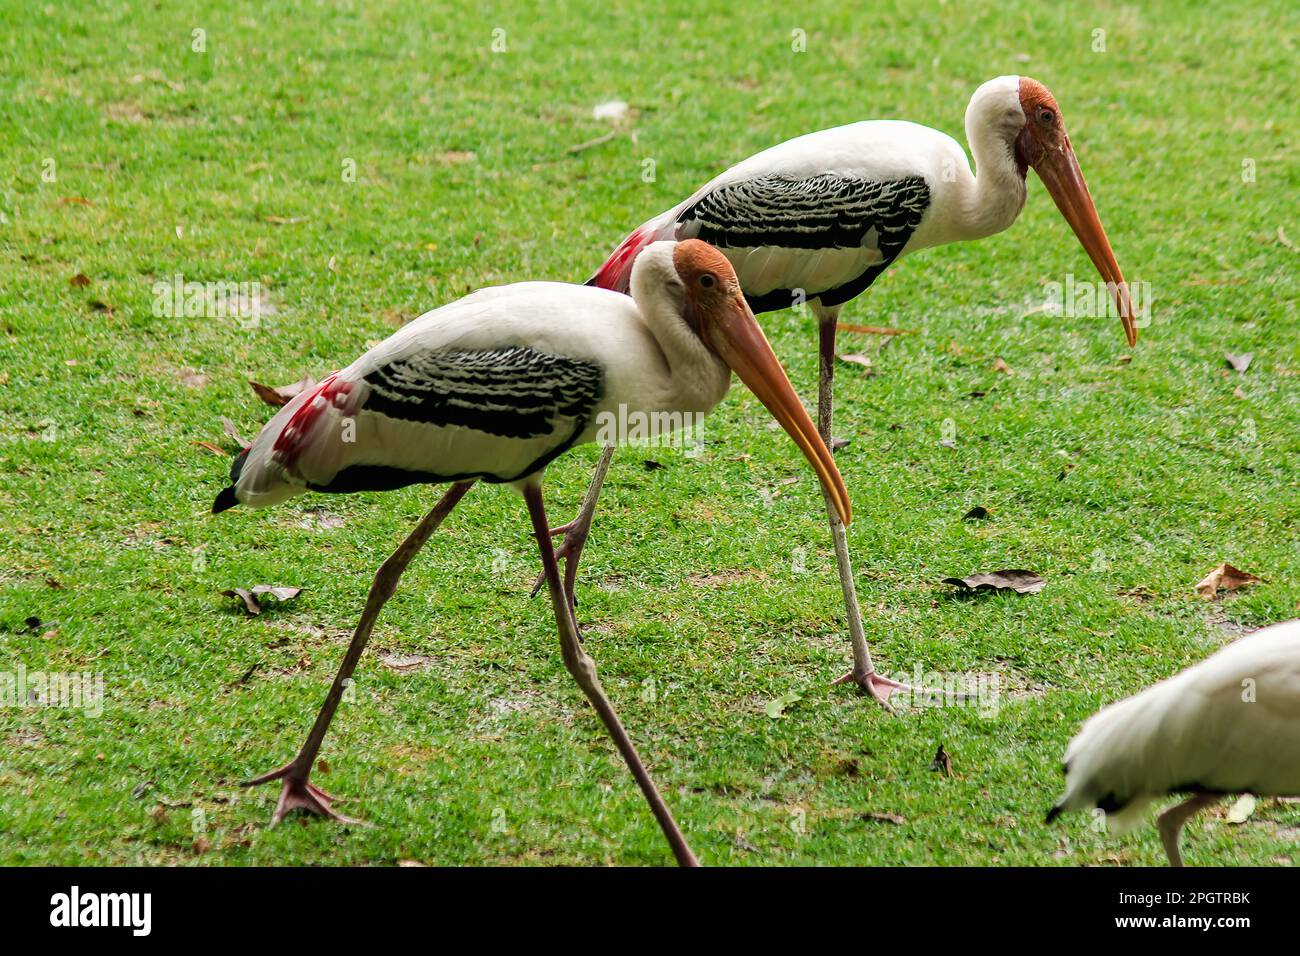 Painted Storks walk on the lawn. And has a unique pink plumage Painted Stork (Mycteria leucocephala) walking on the lawn. Unique pink plumage Stock Photo